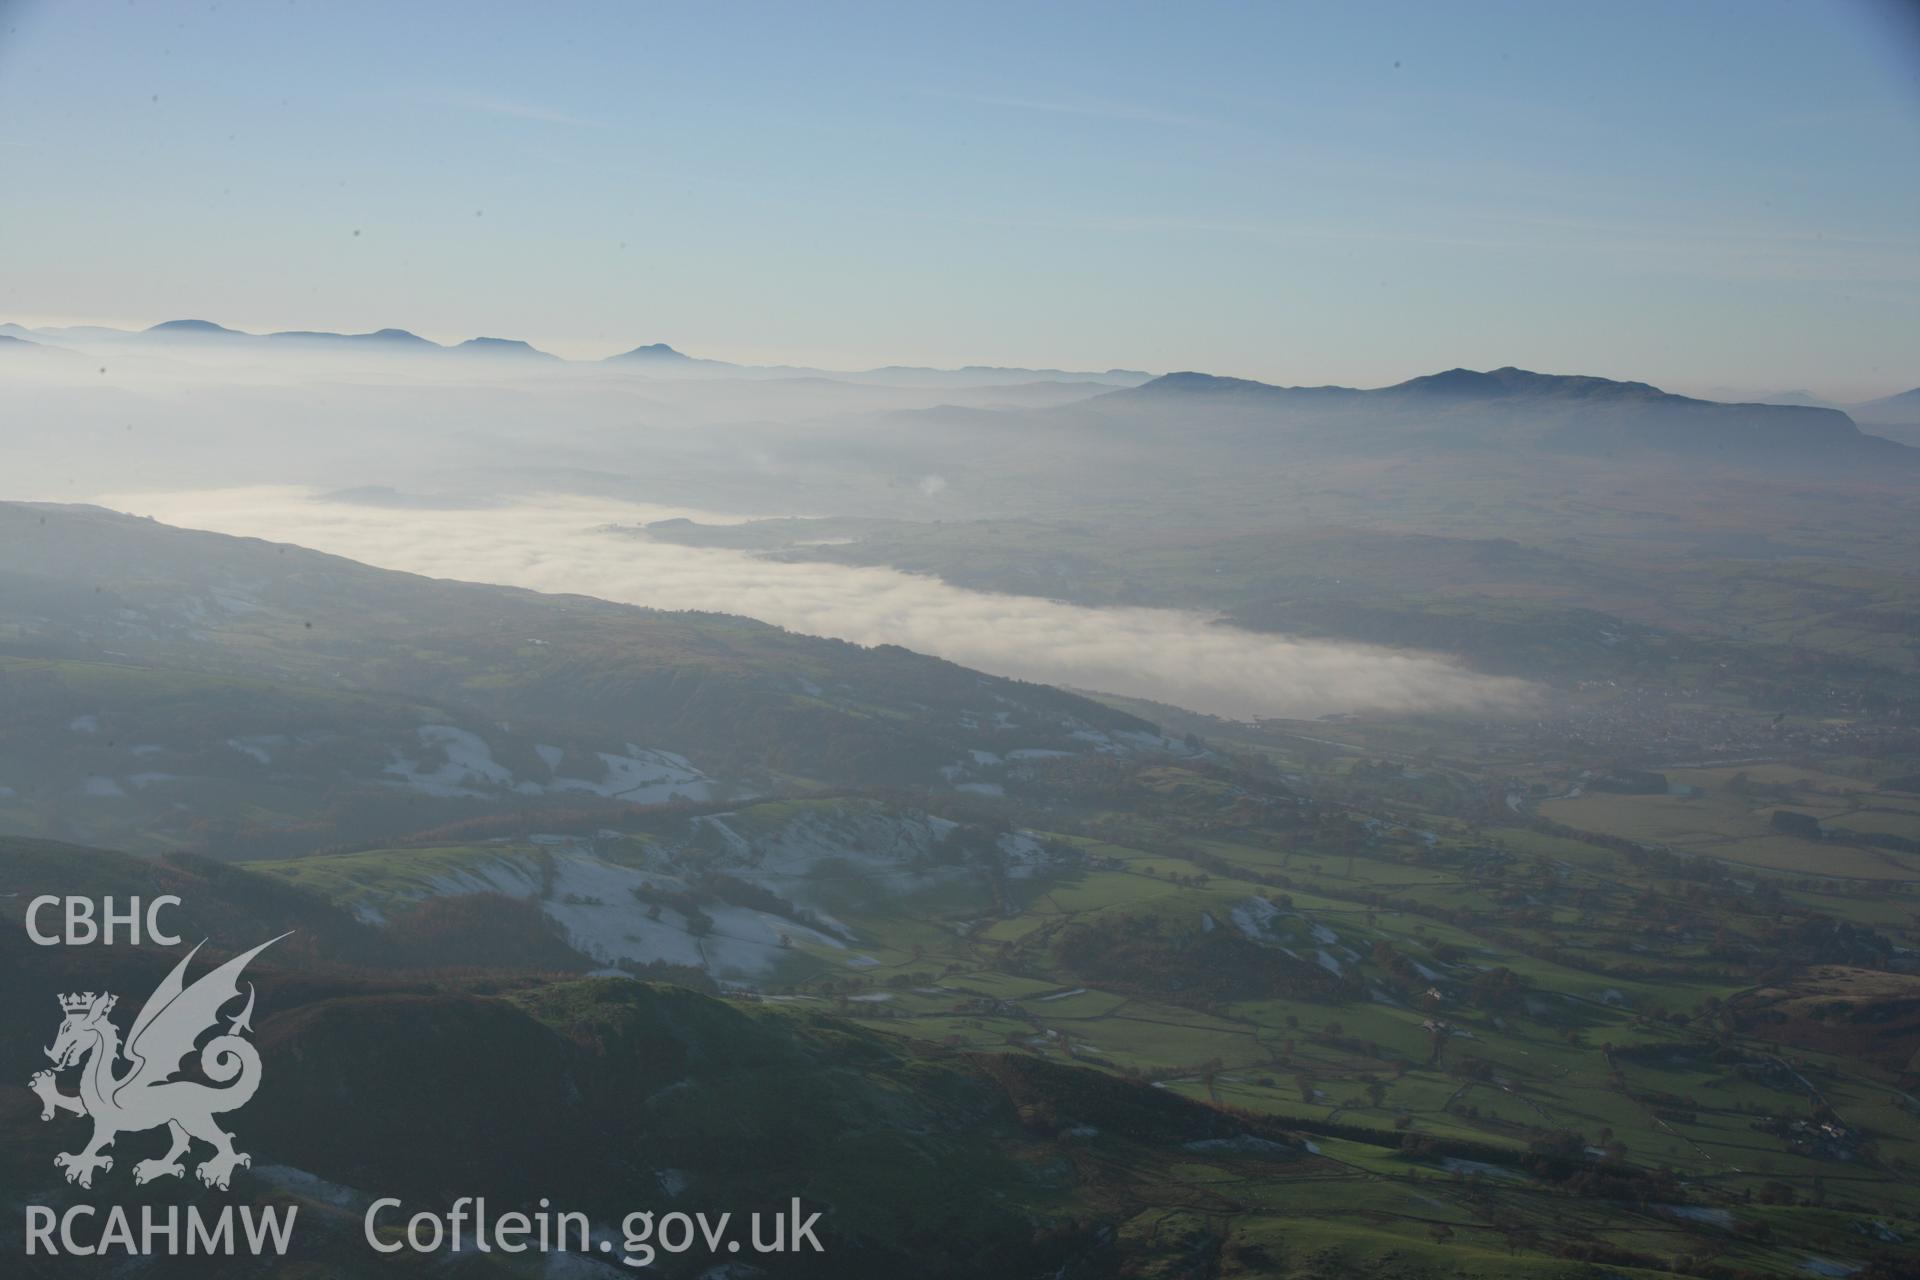 RCAHMW colour oblique aerial photograph of Llyn Tegid (Bala Lake) in winter landscape with mist infilling lake, looking west. Dust specks are visible from the digital sensor. Taken on 21 November 2005 by Toby Driver